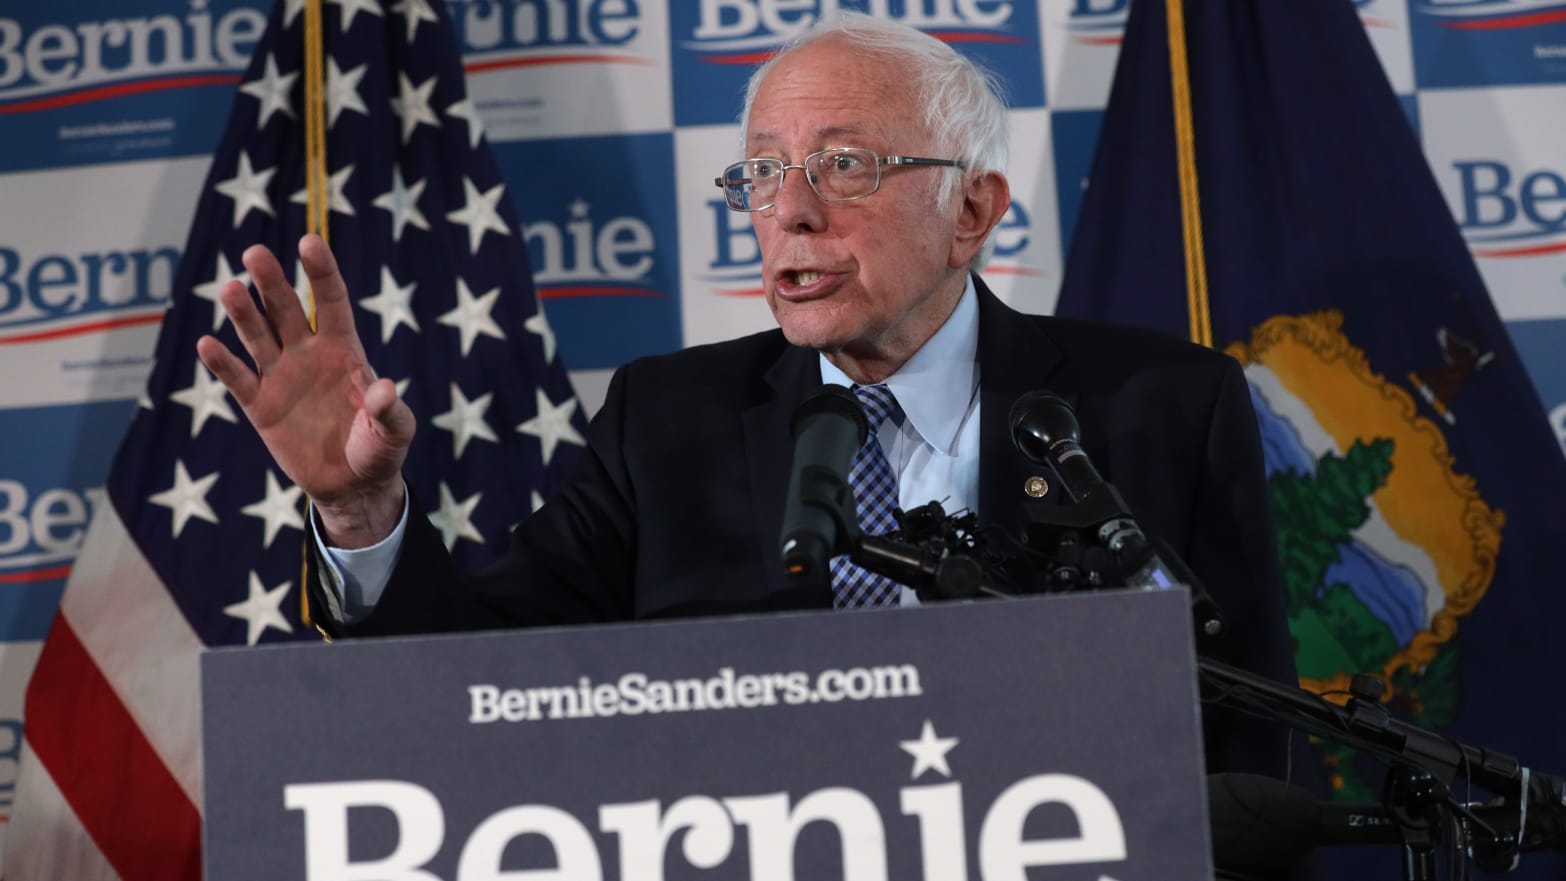 Sen. Bernie Sanders (I-VT) speaks to members of the media during a briefing at his campaign office in Burlington Vermont on March 4, 2020.